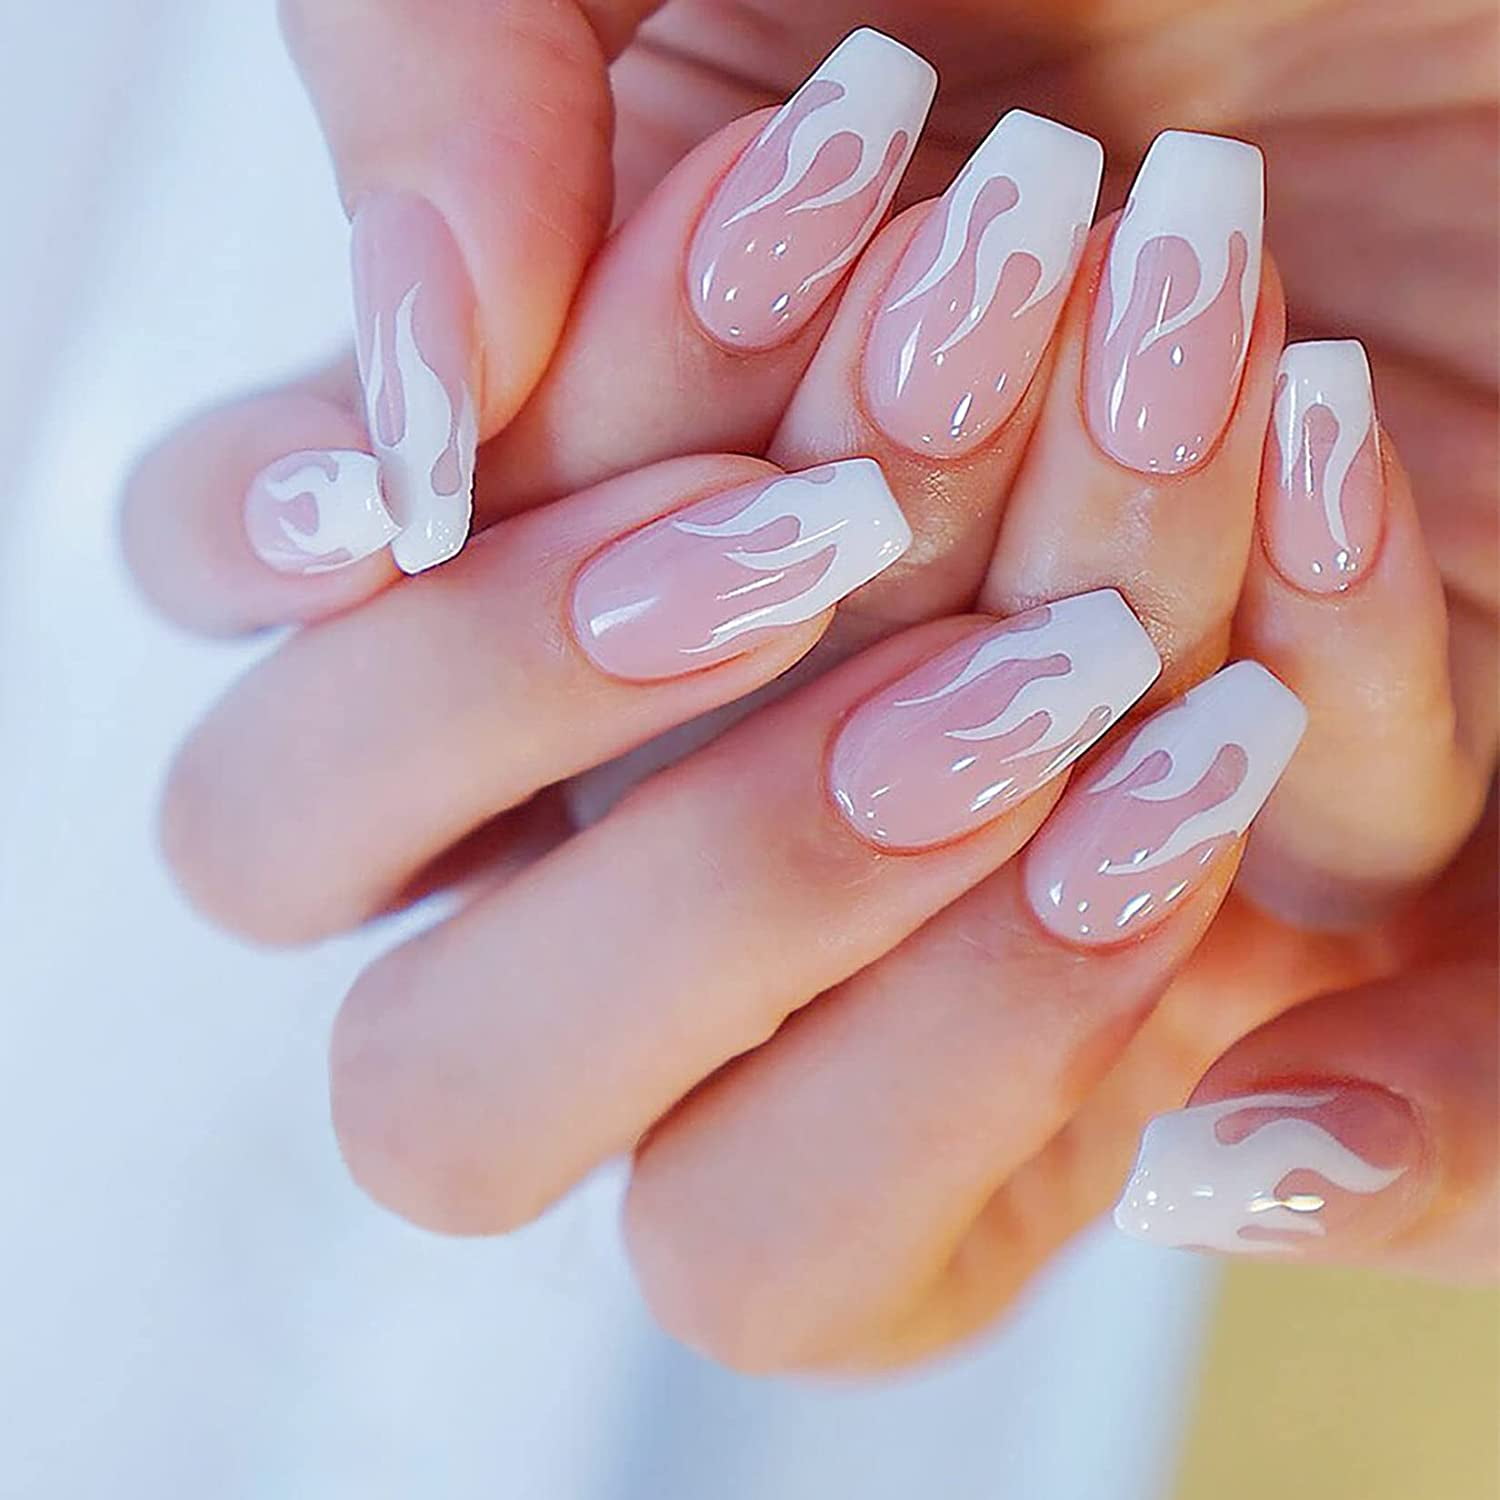 Extra Long Press on Nails,Glossy Ballets Coffin Gradient White Pink Fake  Nails with Cross Design,Acrylic Full Cover Gel Nails and Glue Kits,24 Pcs 